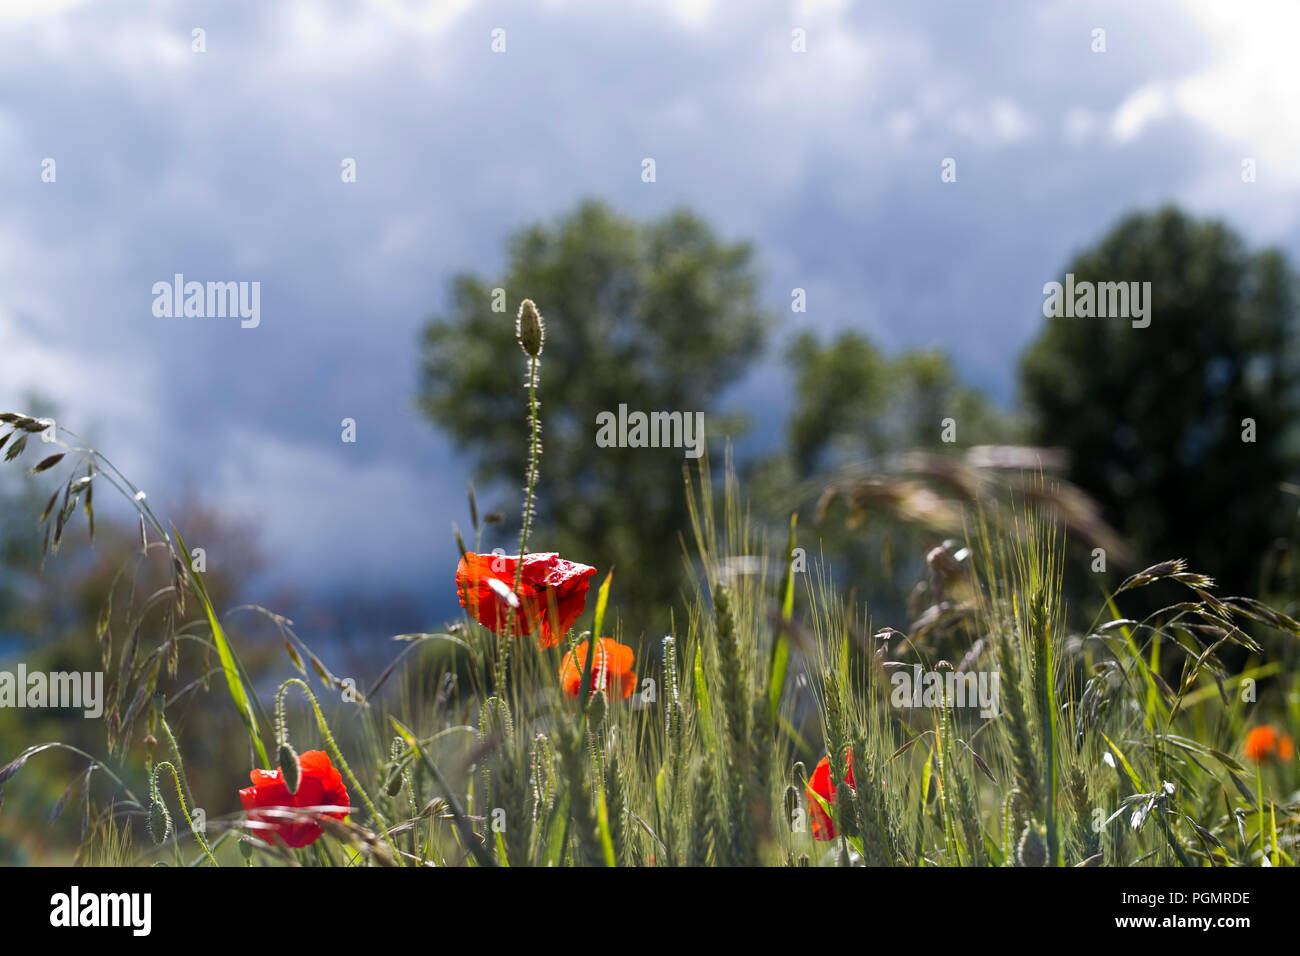 Poppies and other weeds growing in farmland in Lexos, part of the commune of Varen, Tarn et Garonne, Occitanie, France, Europe Stock Photo